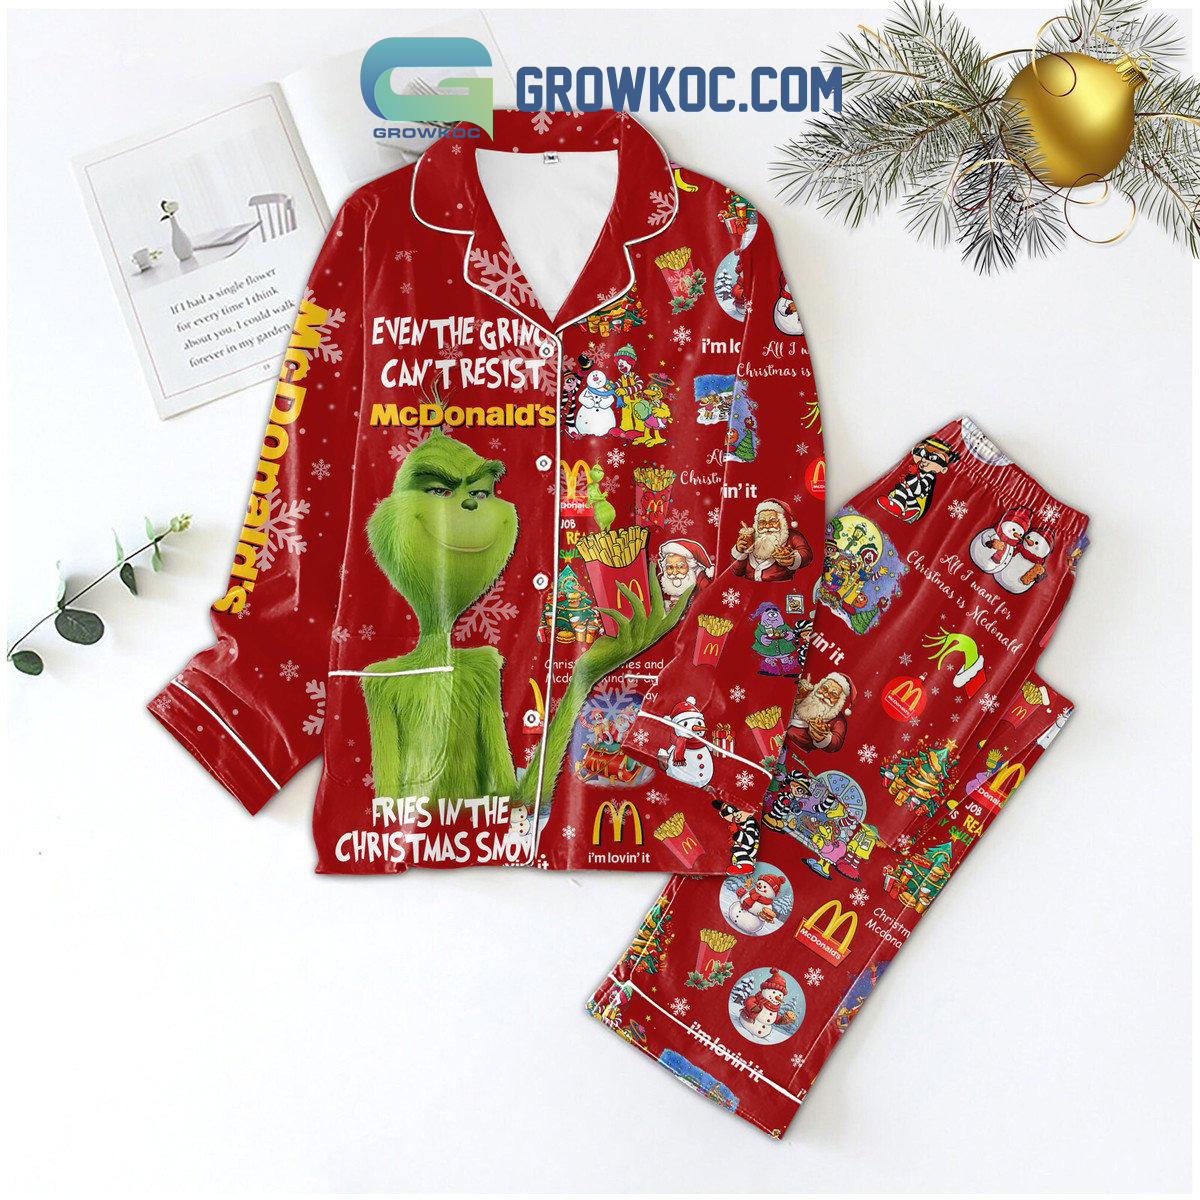 Even The Grinch Cans't Resist McDonalds's Fries In The Christmas Snow Is'm Lovins'It Christmas Silk Pajamas Sets